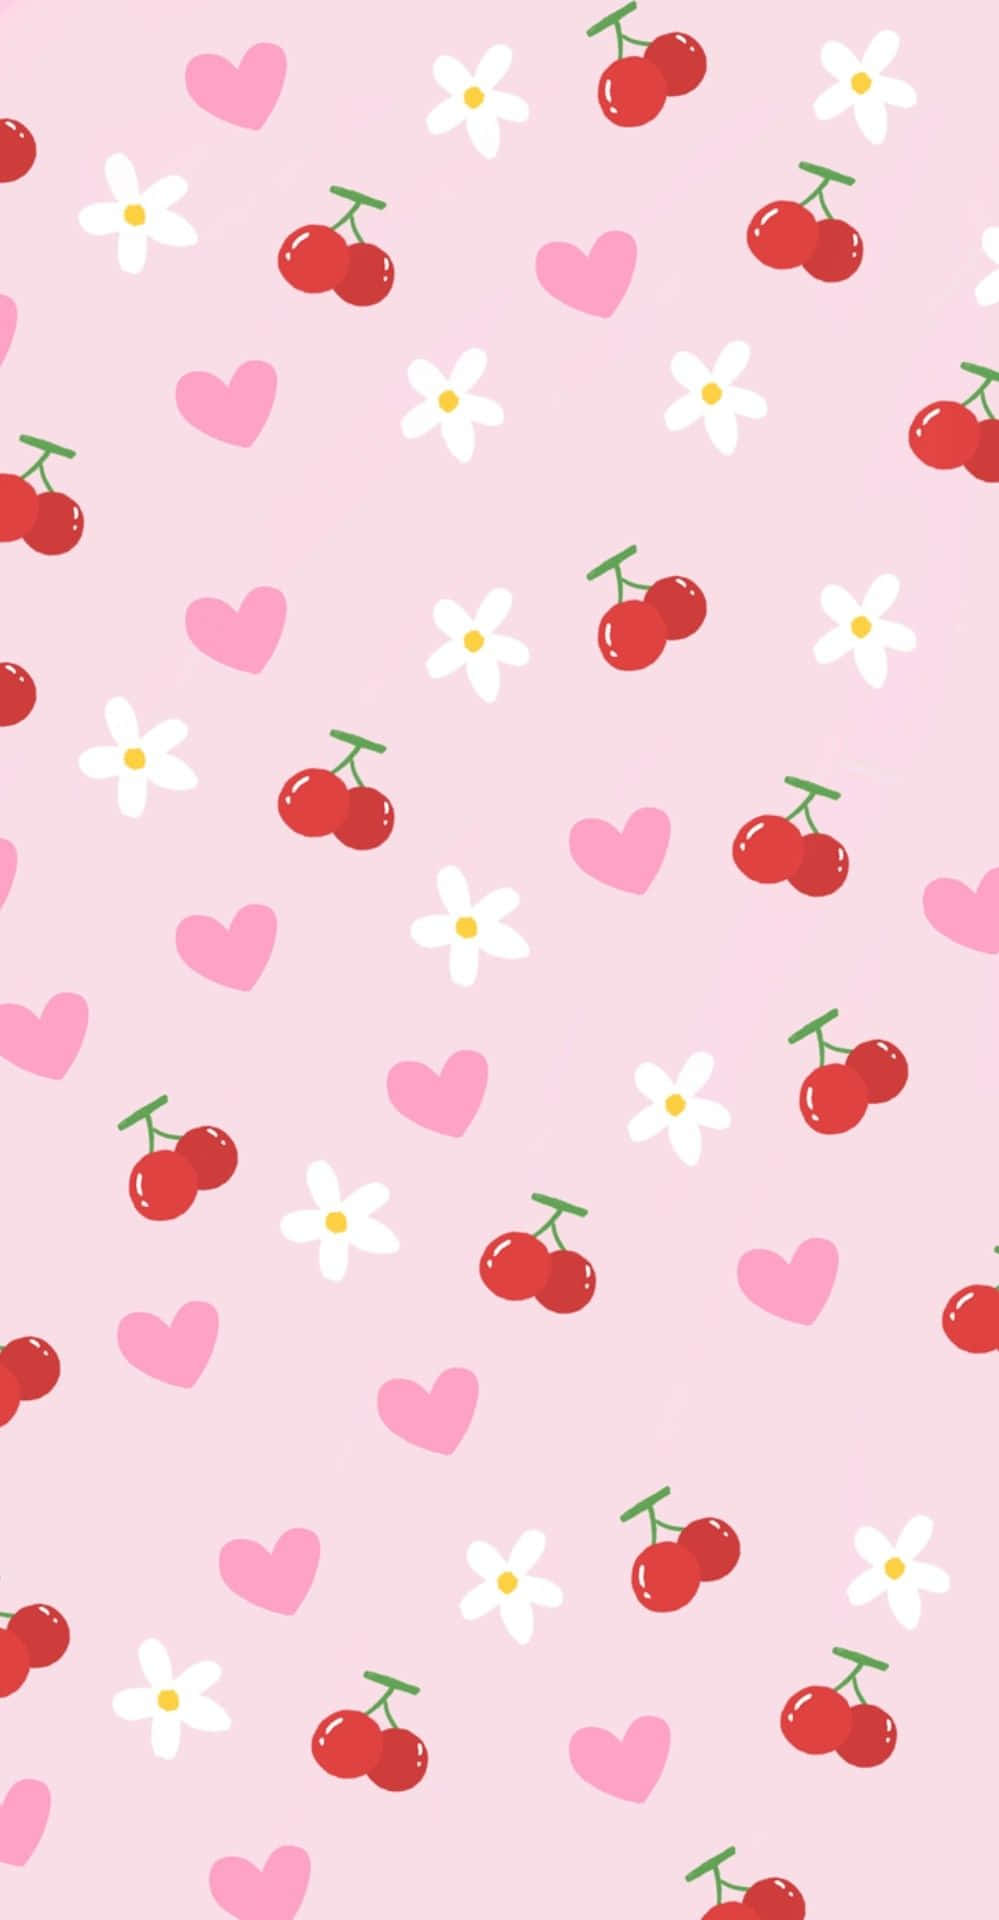 Cute Cherries With Pink Hearts And White Flowers Wallpaper